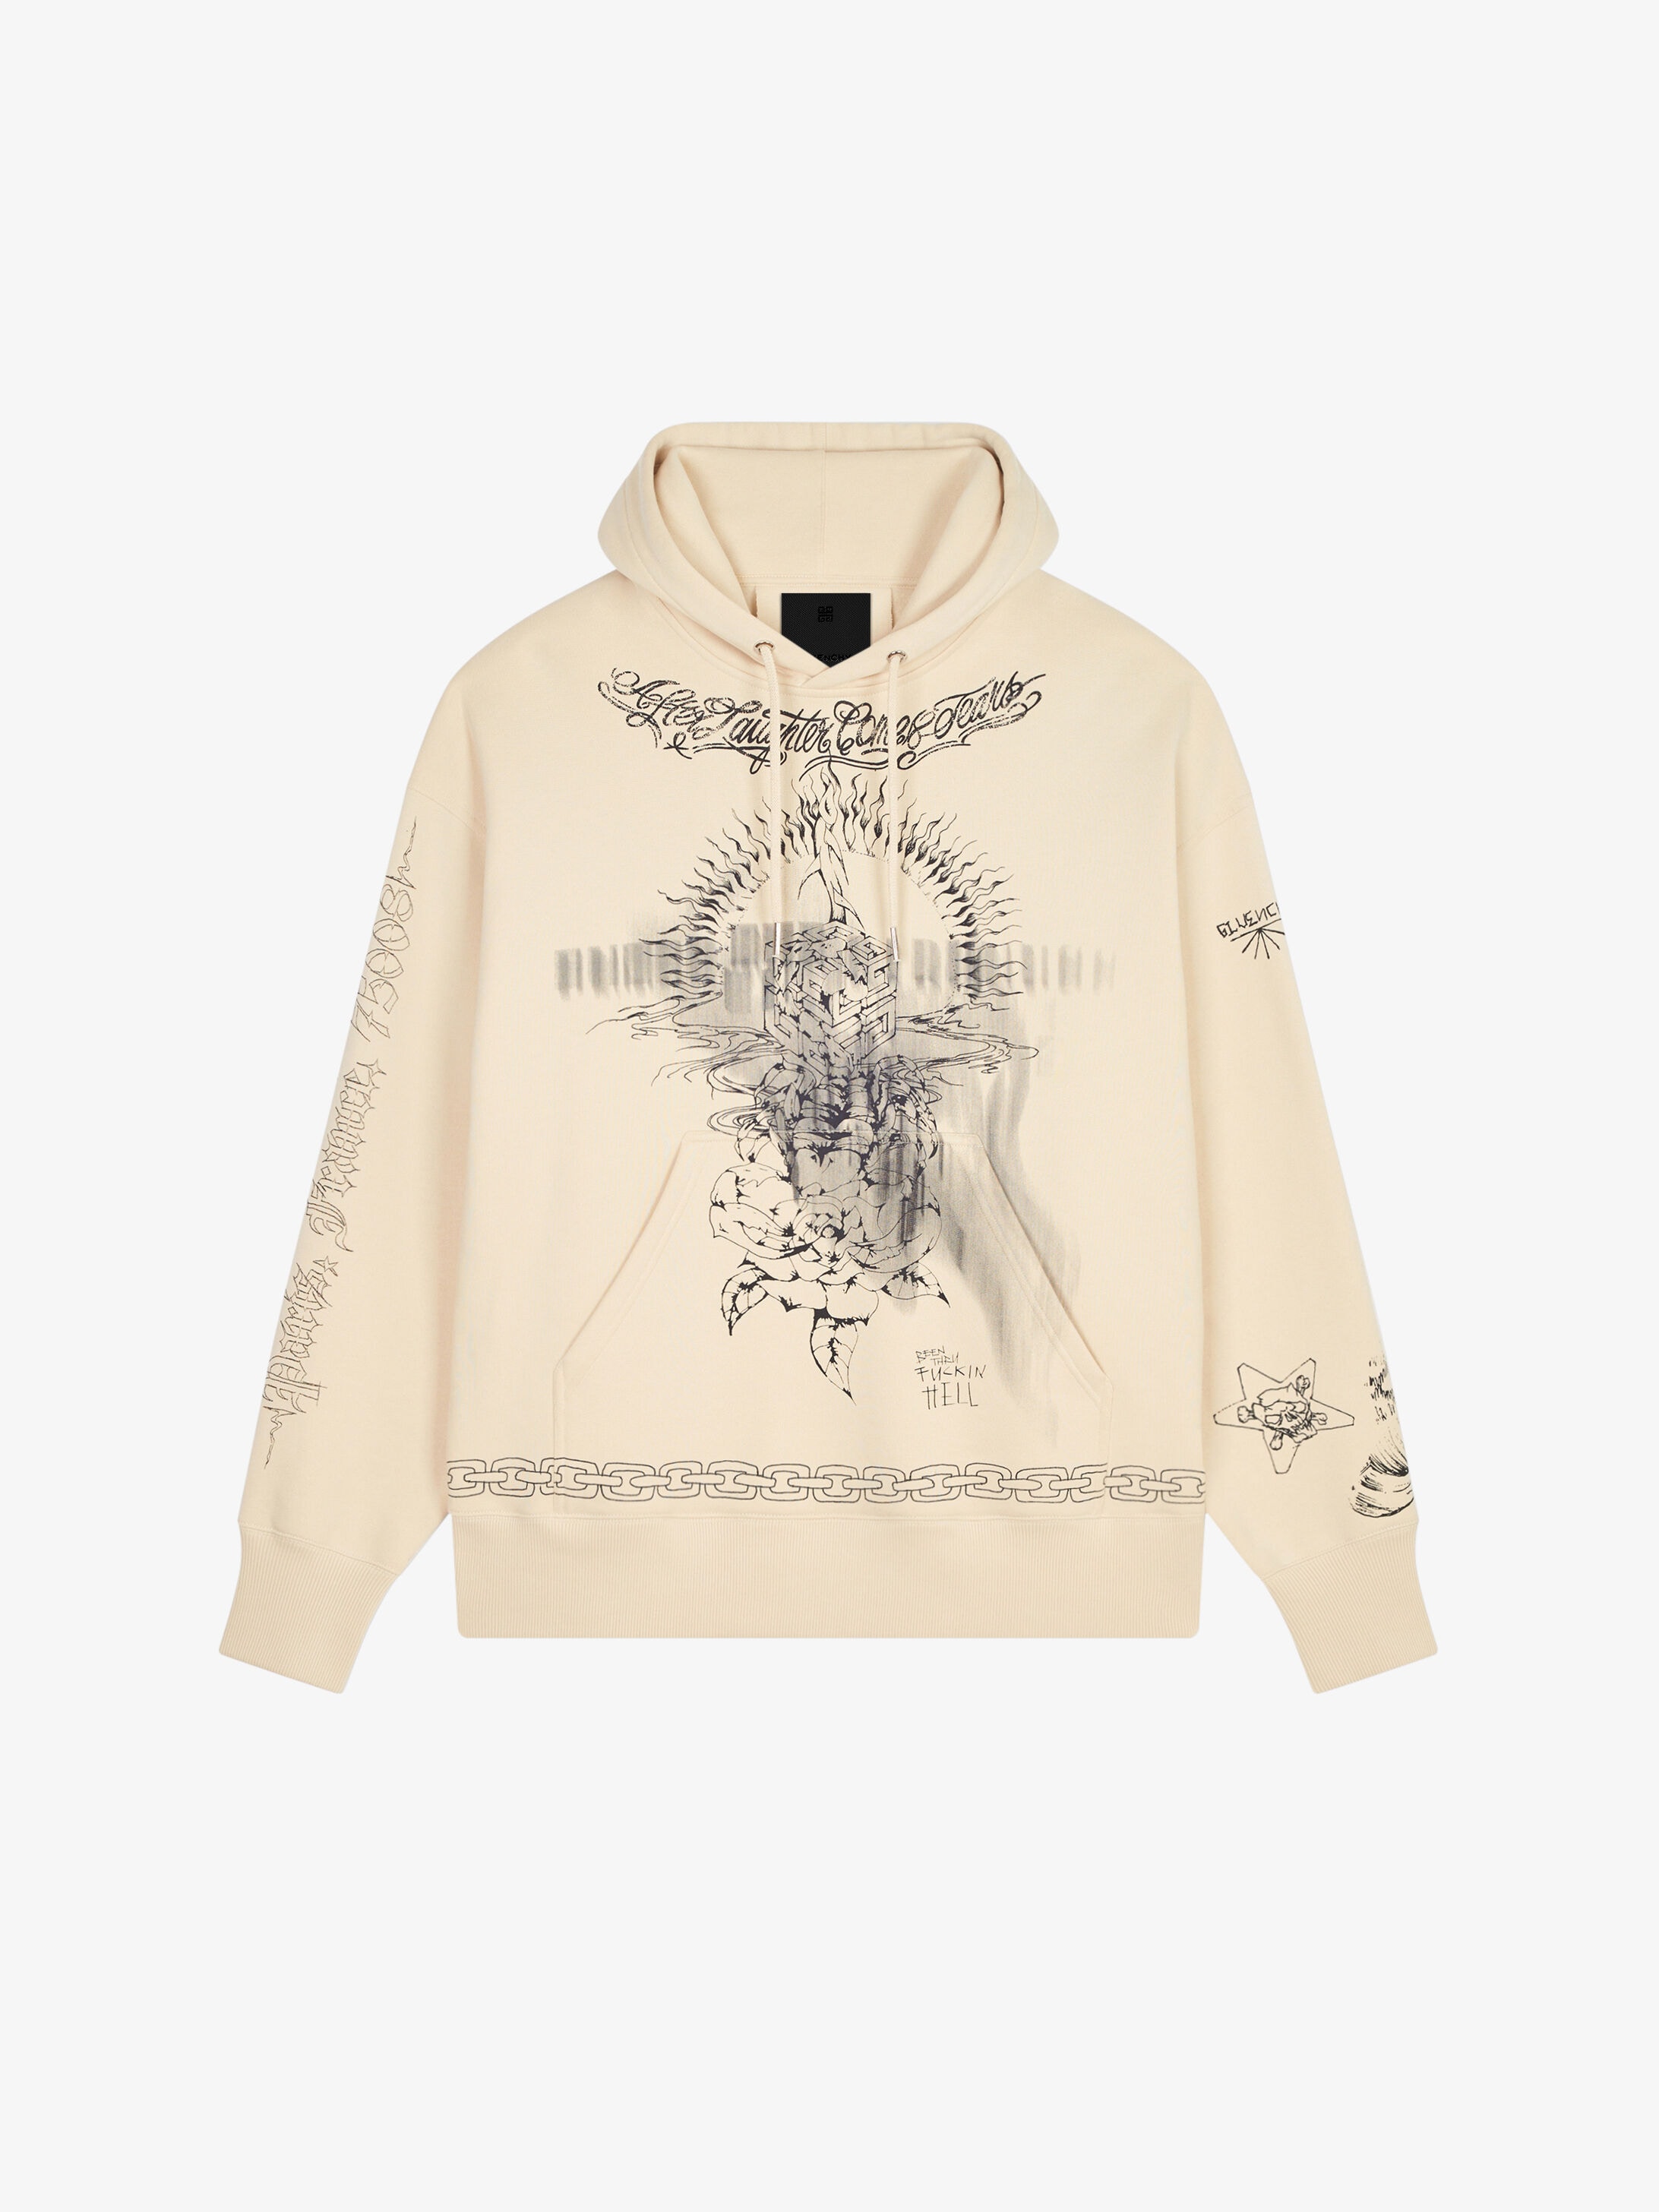 givenchy mens hoodie